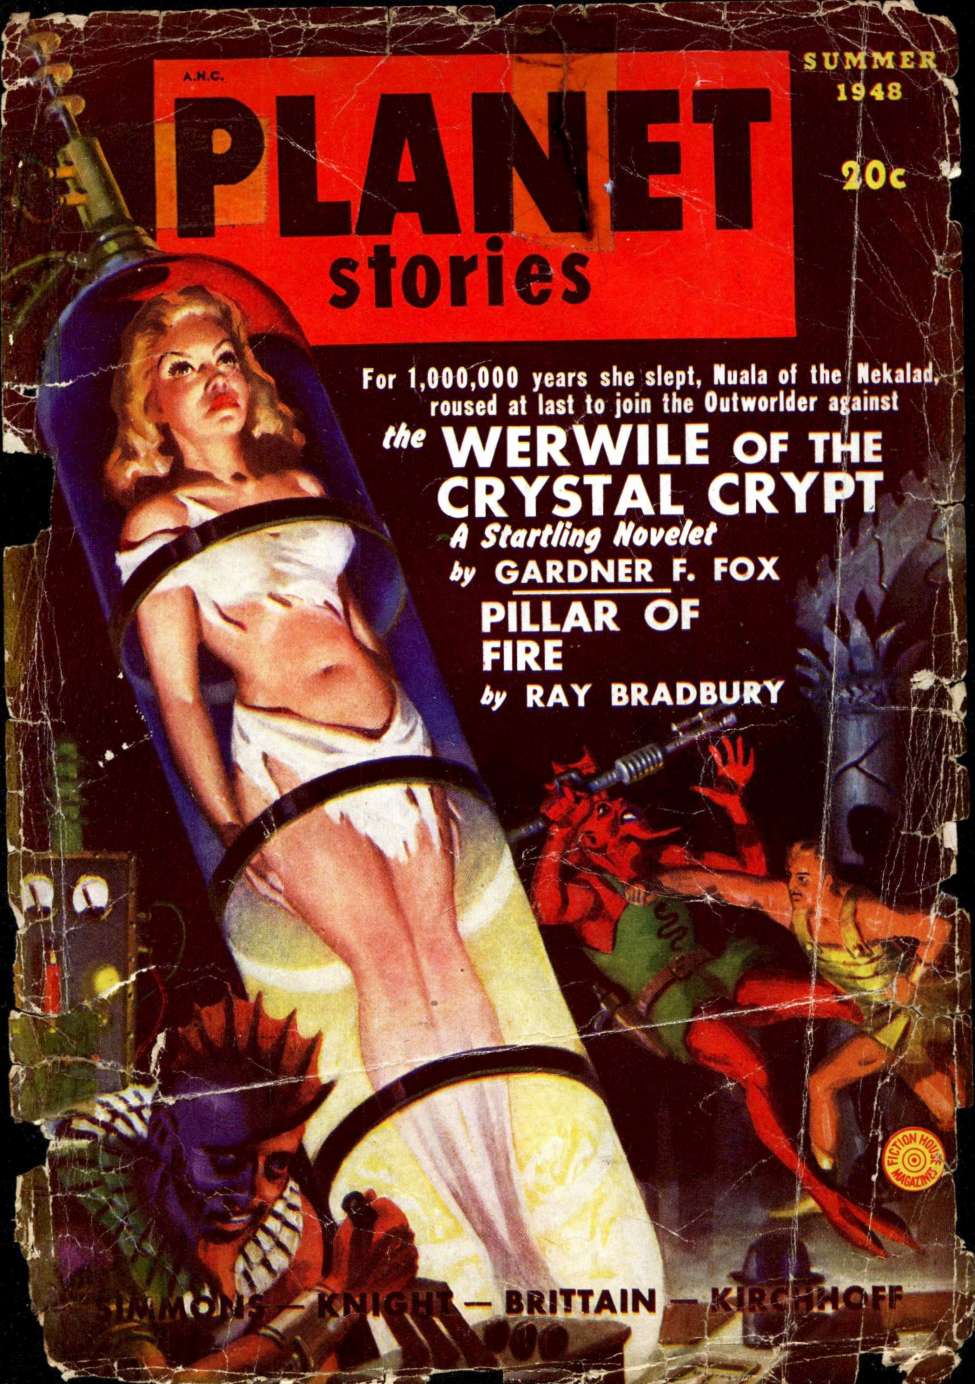 Comic Book Cover For Planet Stories v3 11 - Werwile of the Crystal Crypt - Gardner F. Fox